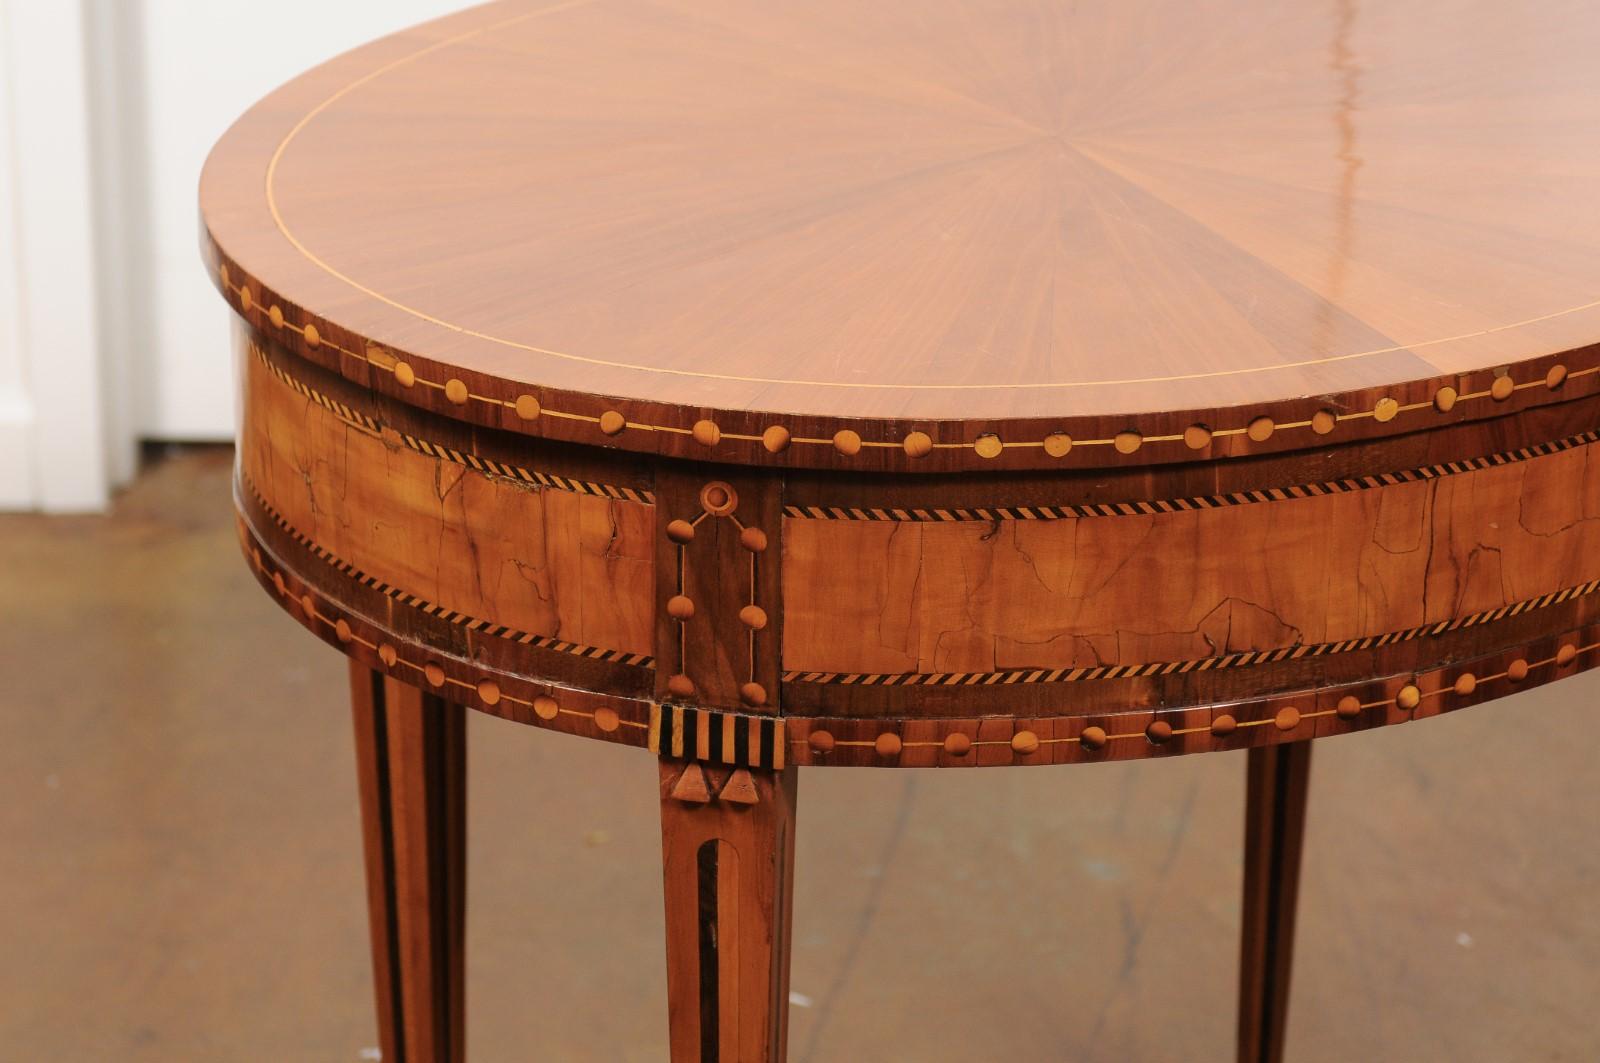 French 19th Century Oval Walnut and Satinwood Inlaid Table with Radiating Veneer (Intarsie)